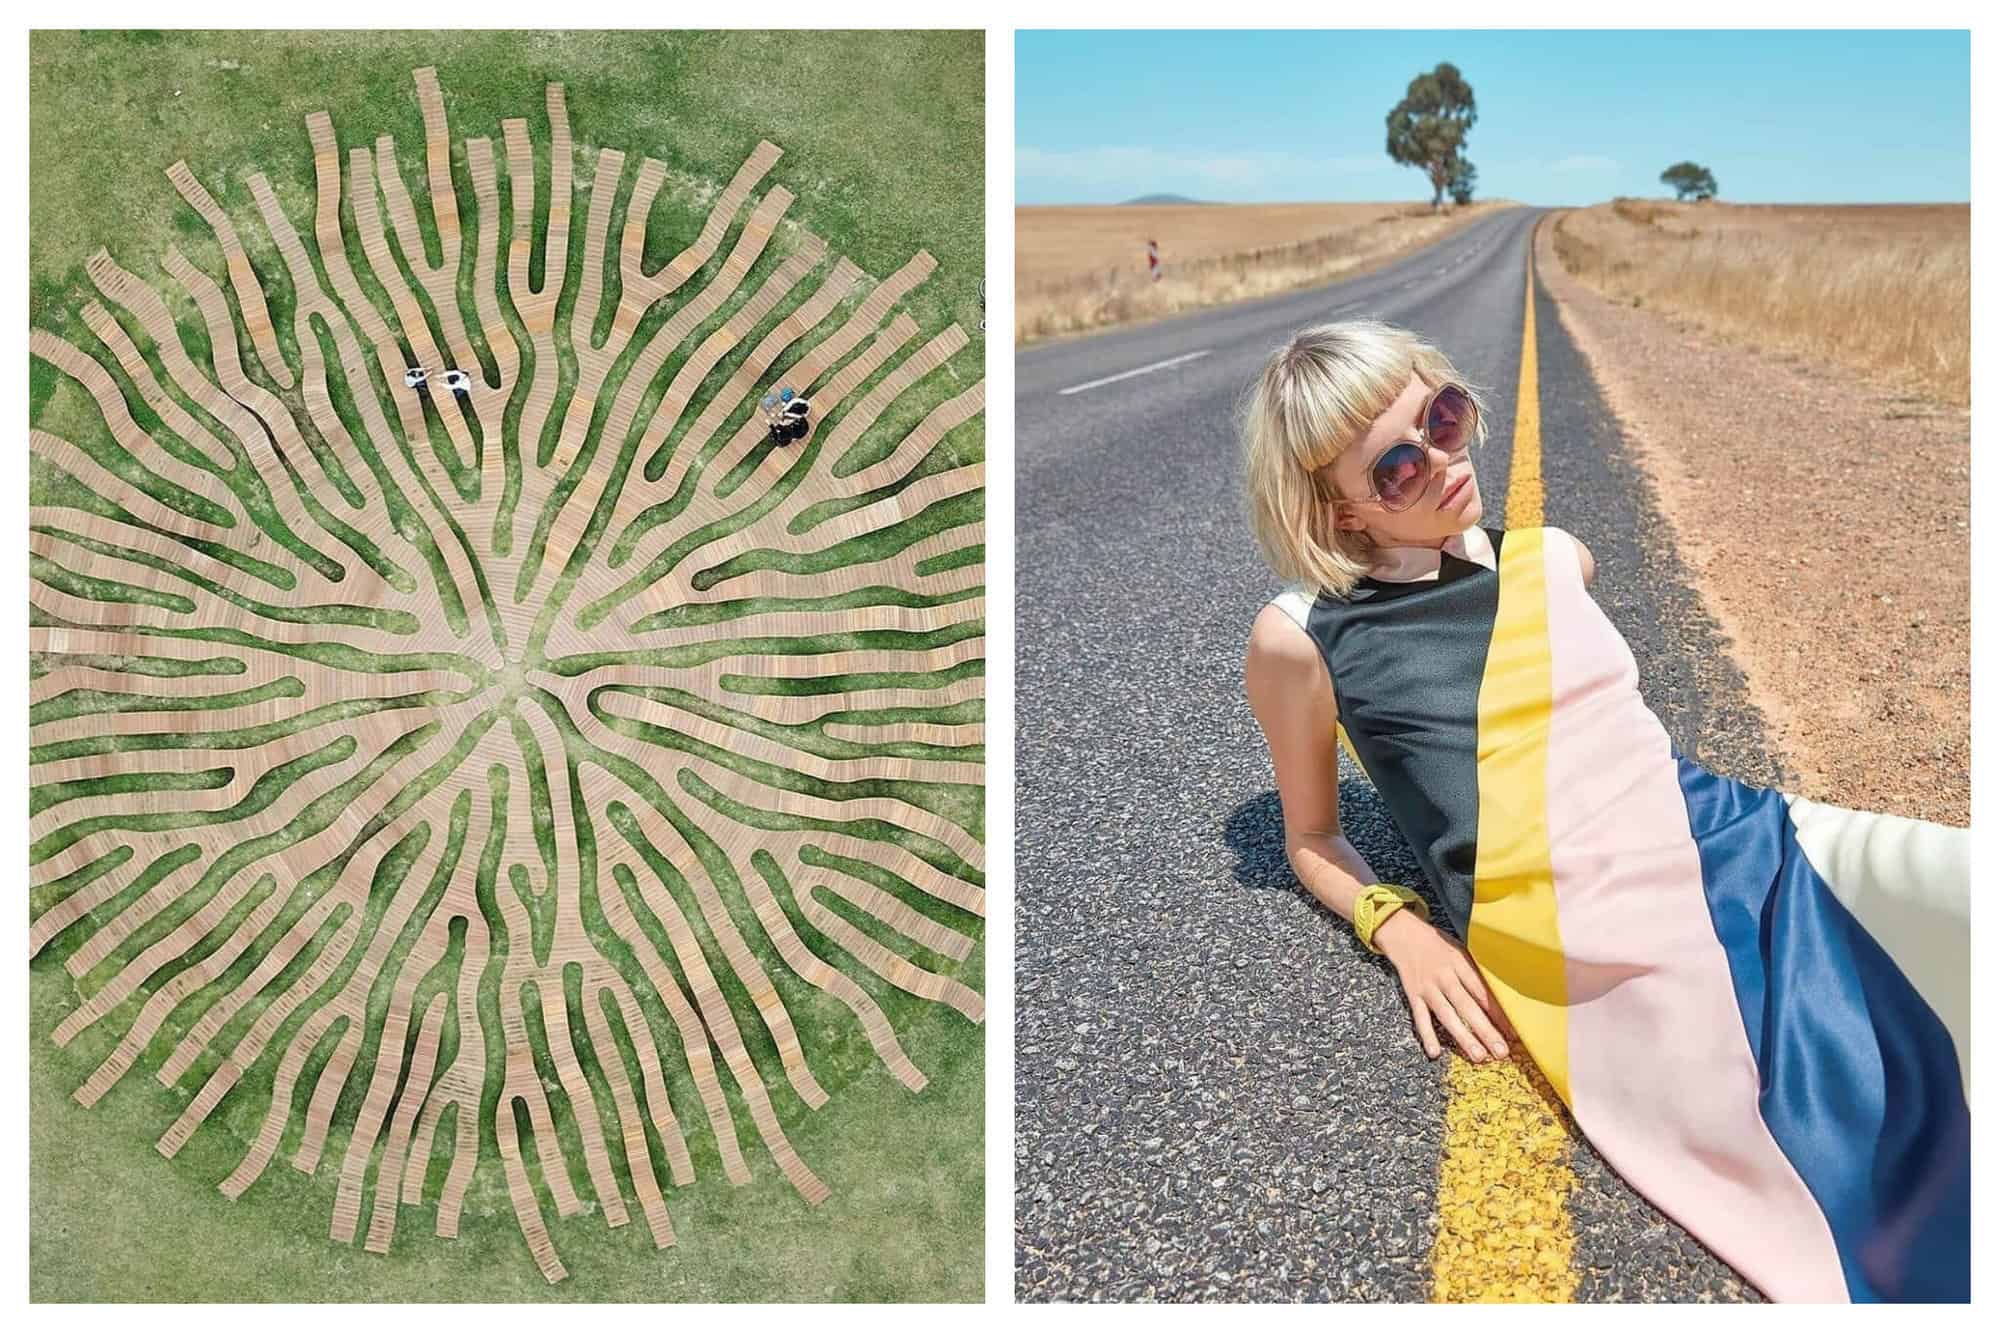 Left: A drone shot of the Root Bench in Seoul Hangang Park, South Korea. Left: A girl in a colorful dress is matching the road with the yellow stripe on across her torso.